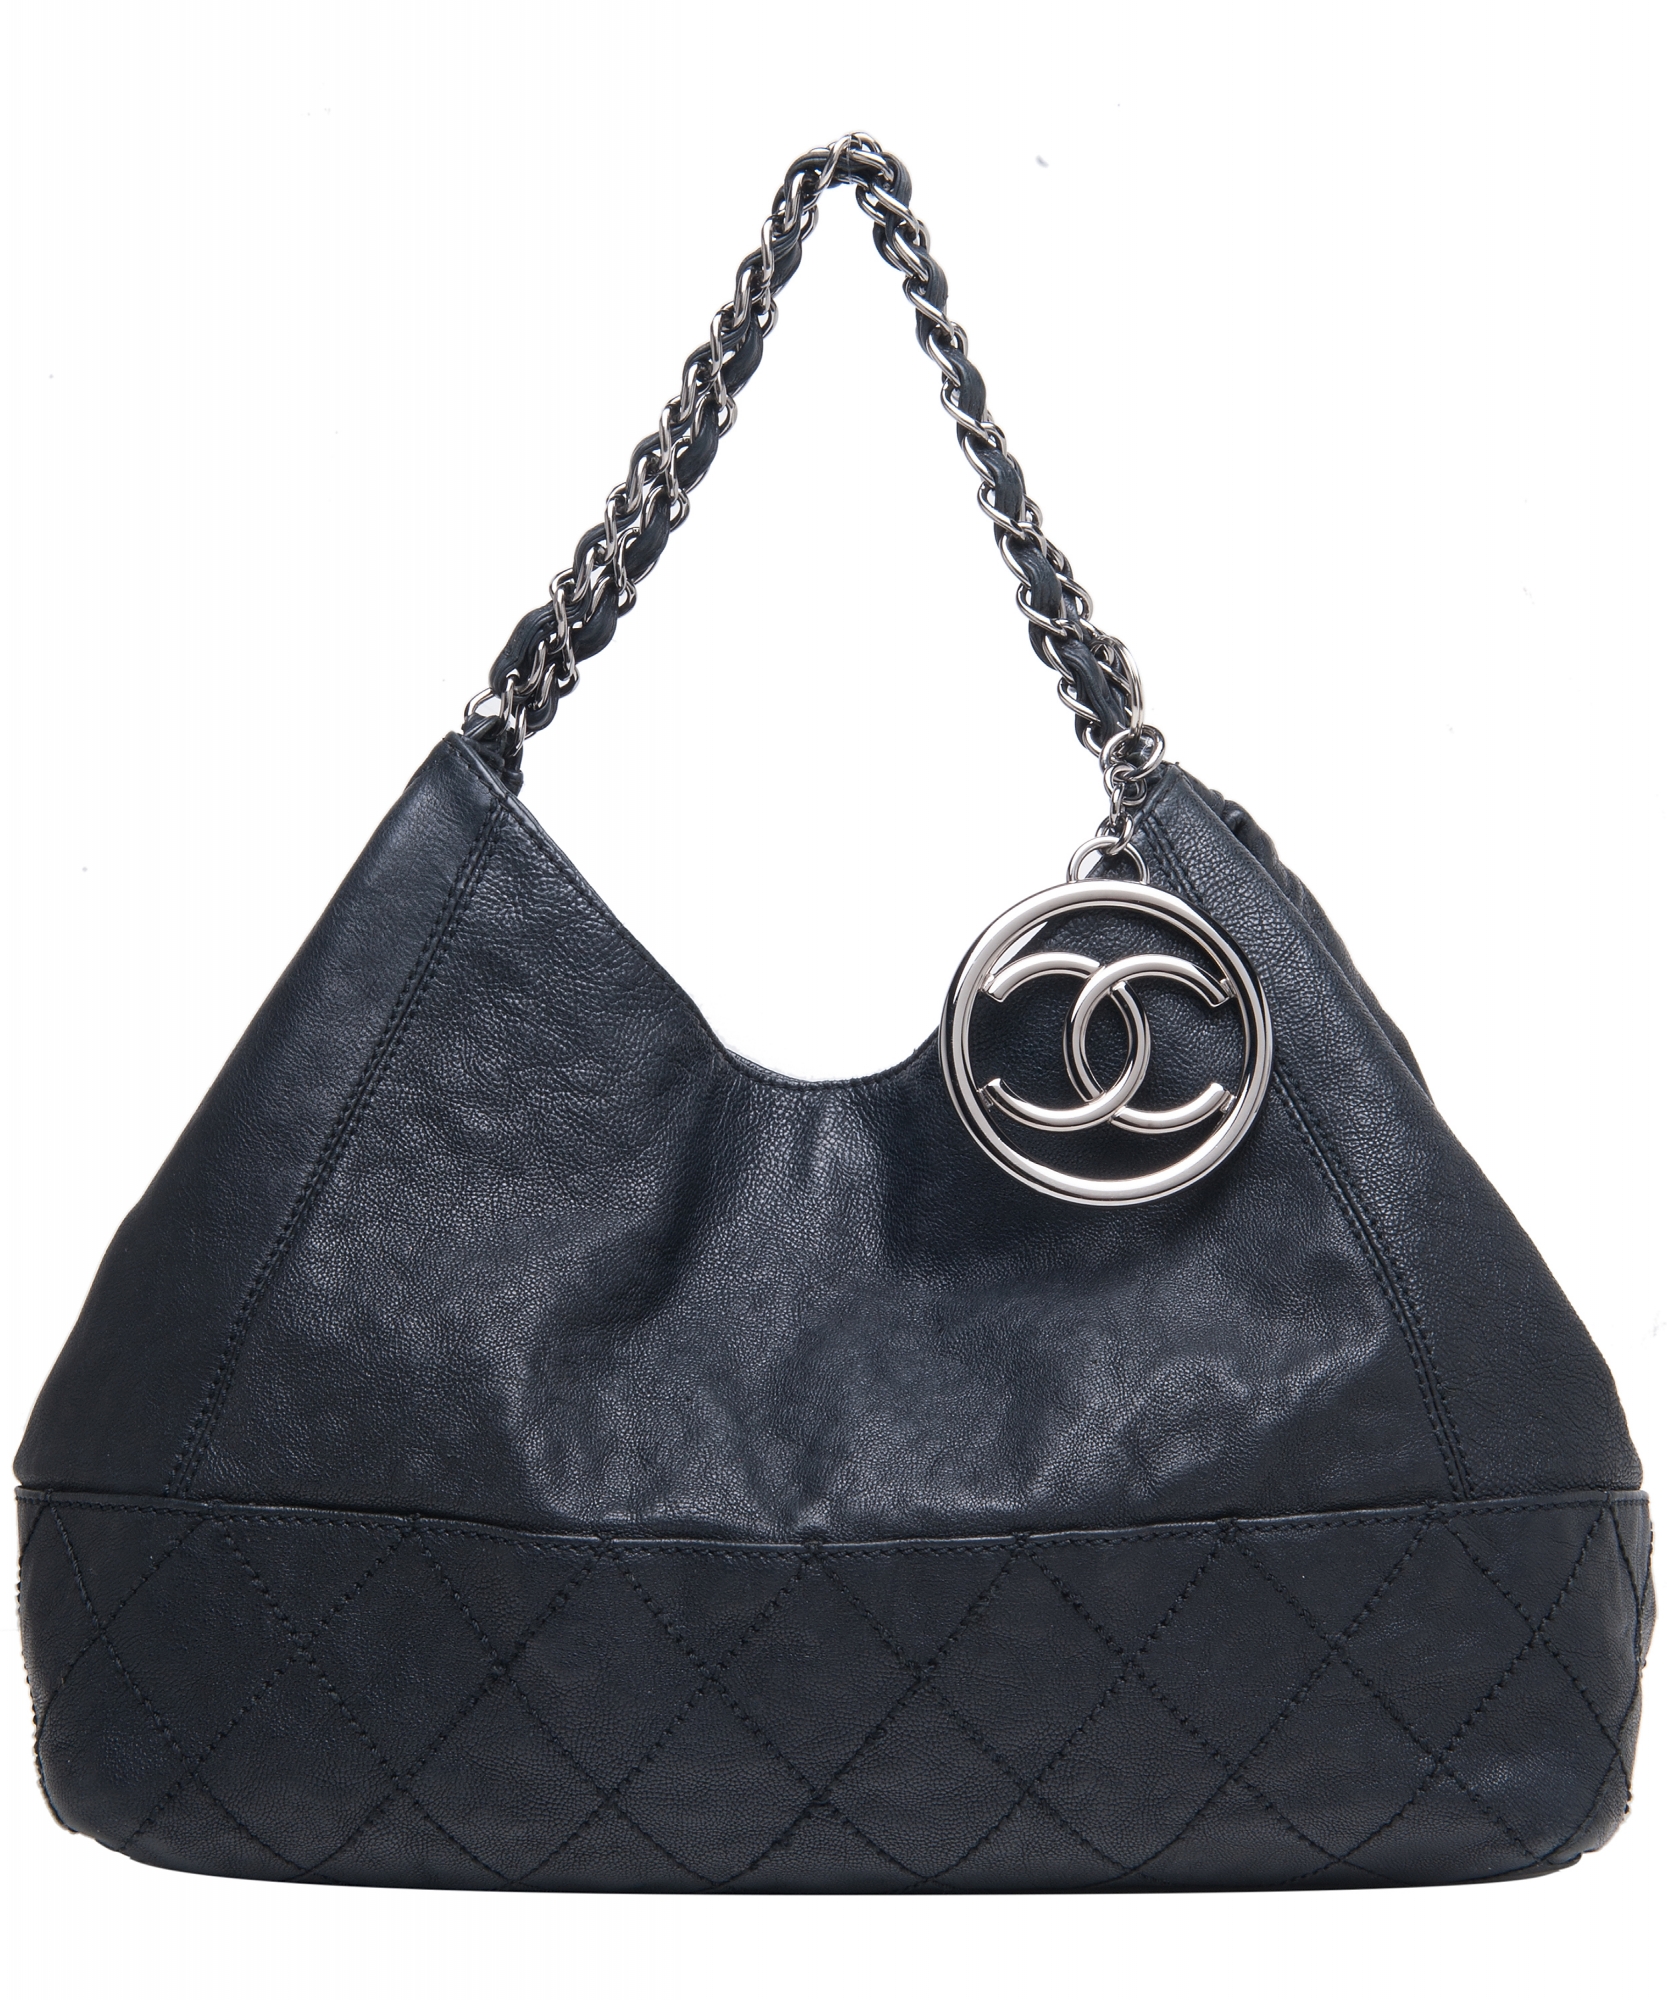 Chanel Coco Cabas Bag Reference Guide - Spotted Fashion